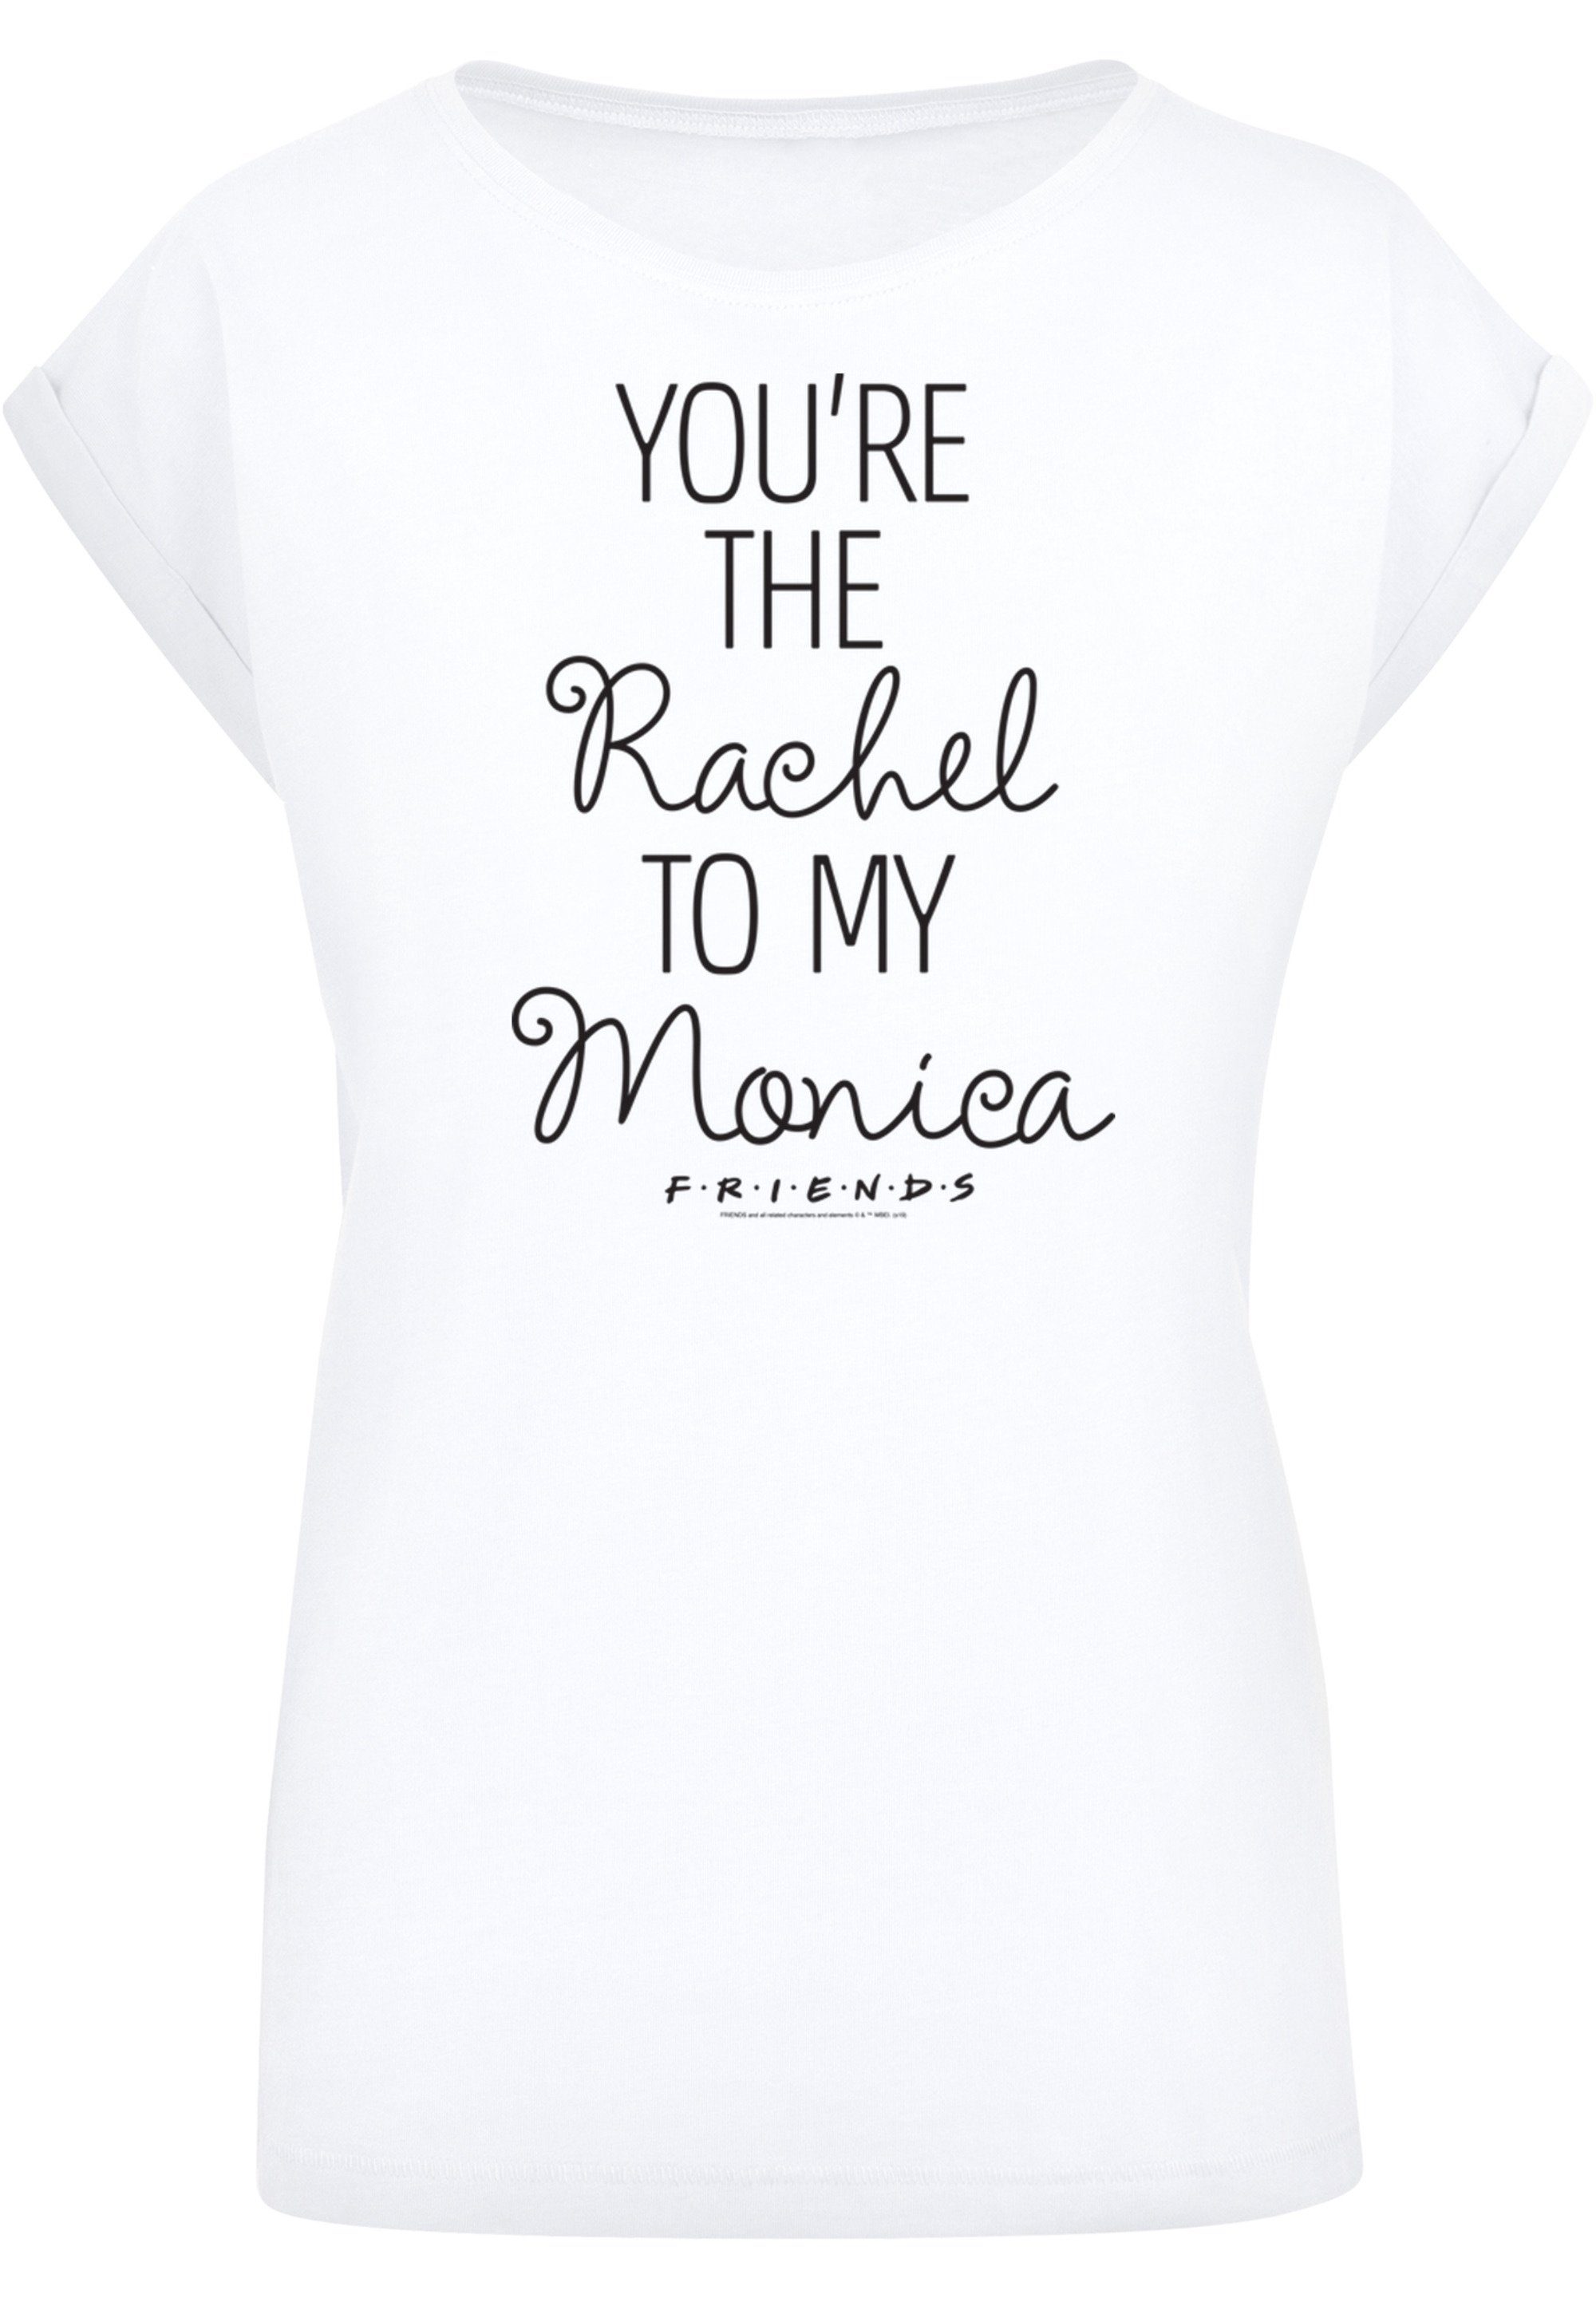 T-Shirt F4NT4STIC Youre My FRIENDS Monica The Rachel To Print